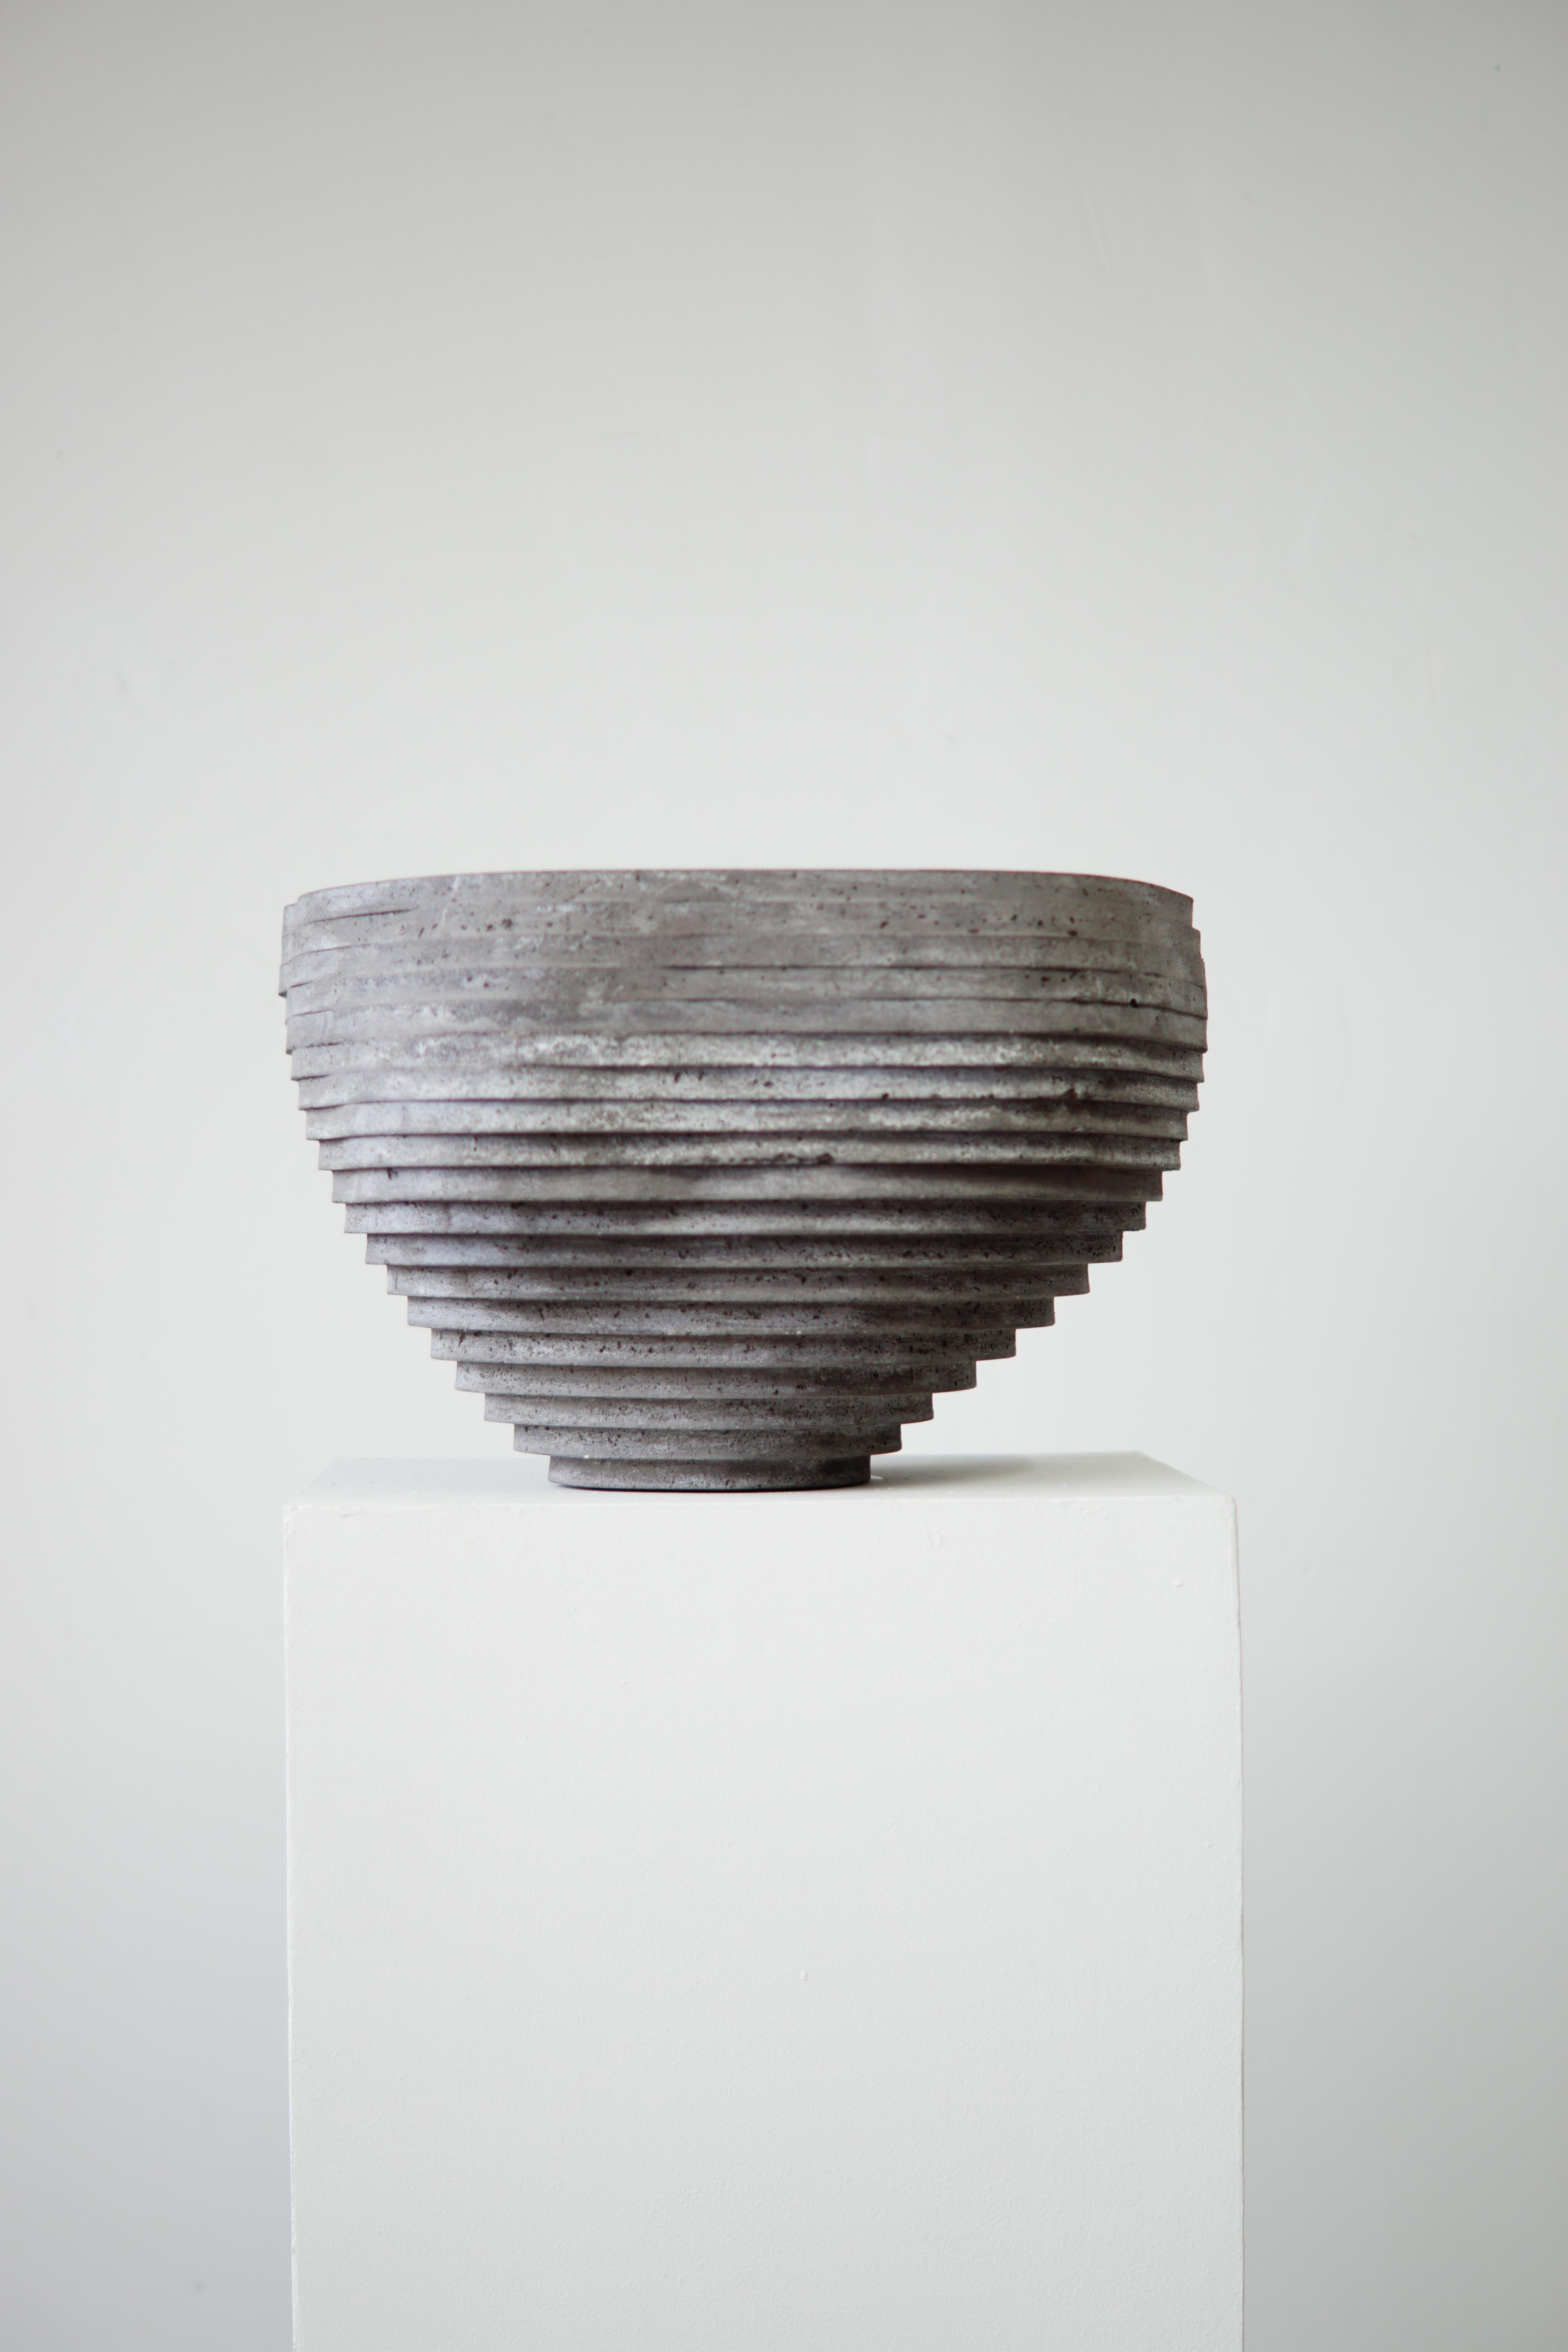 Large hand-cast bowl for indoor and outdoor use. Drainage holes can be added upon request.

At the intersection of art, craft, and design, Concrete Poetics' debut collection of hand-cast cement sculptural furniture and accessories streamlines